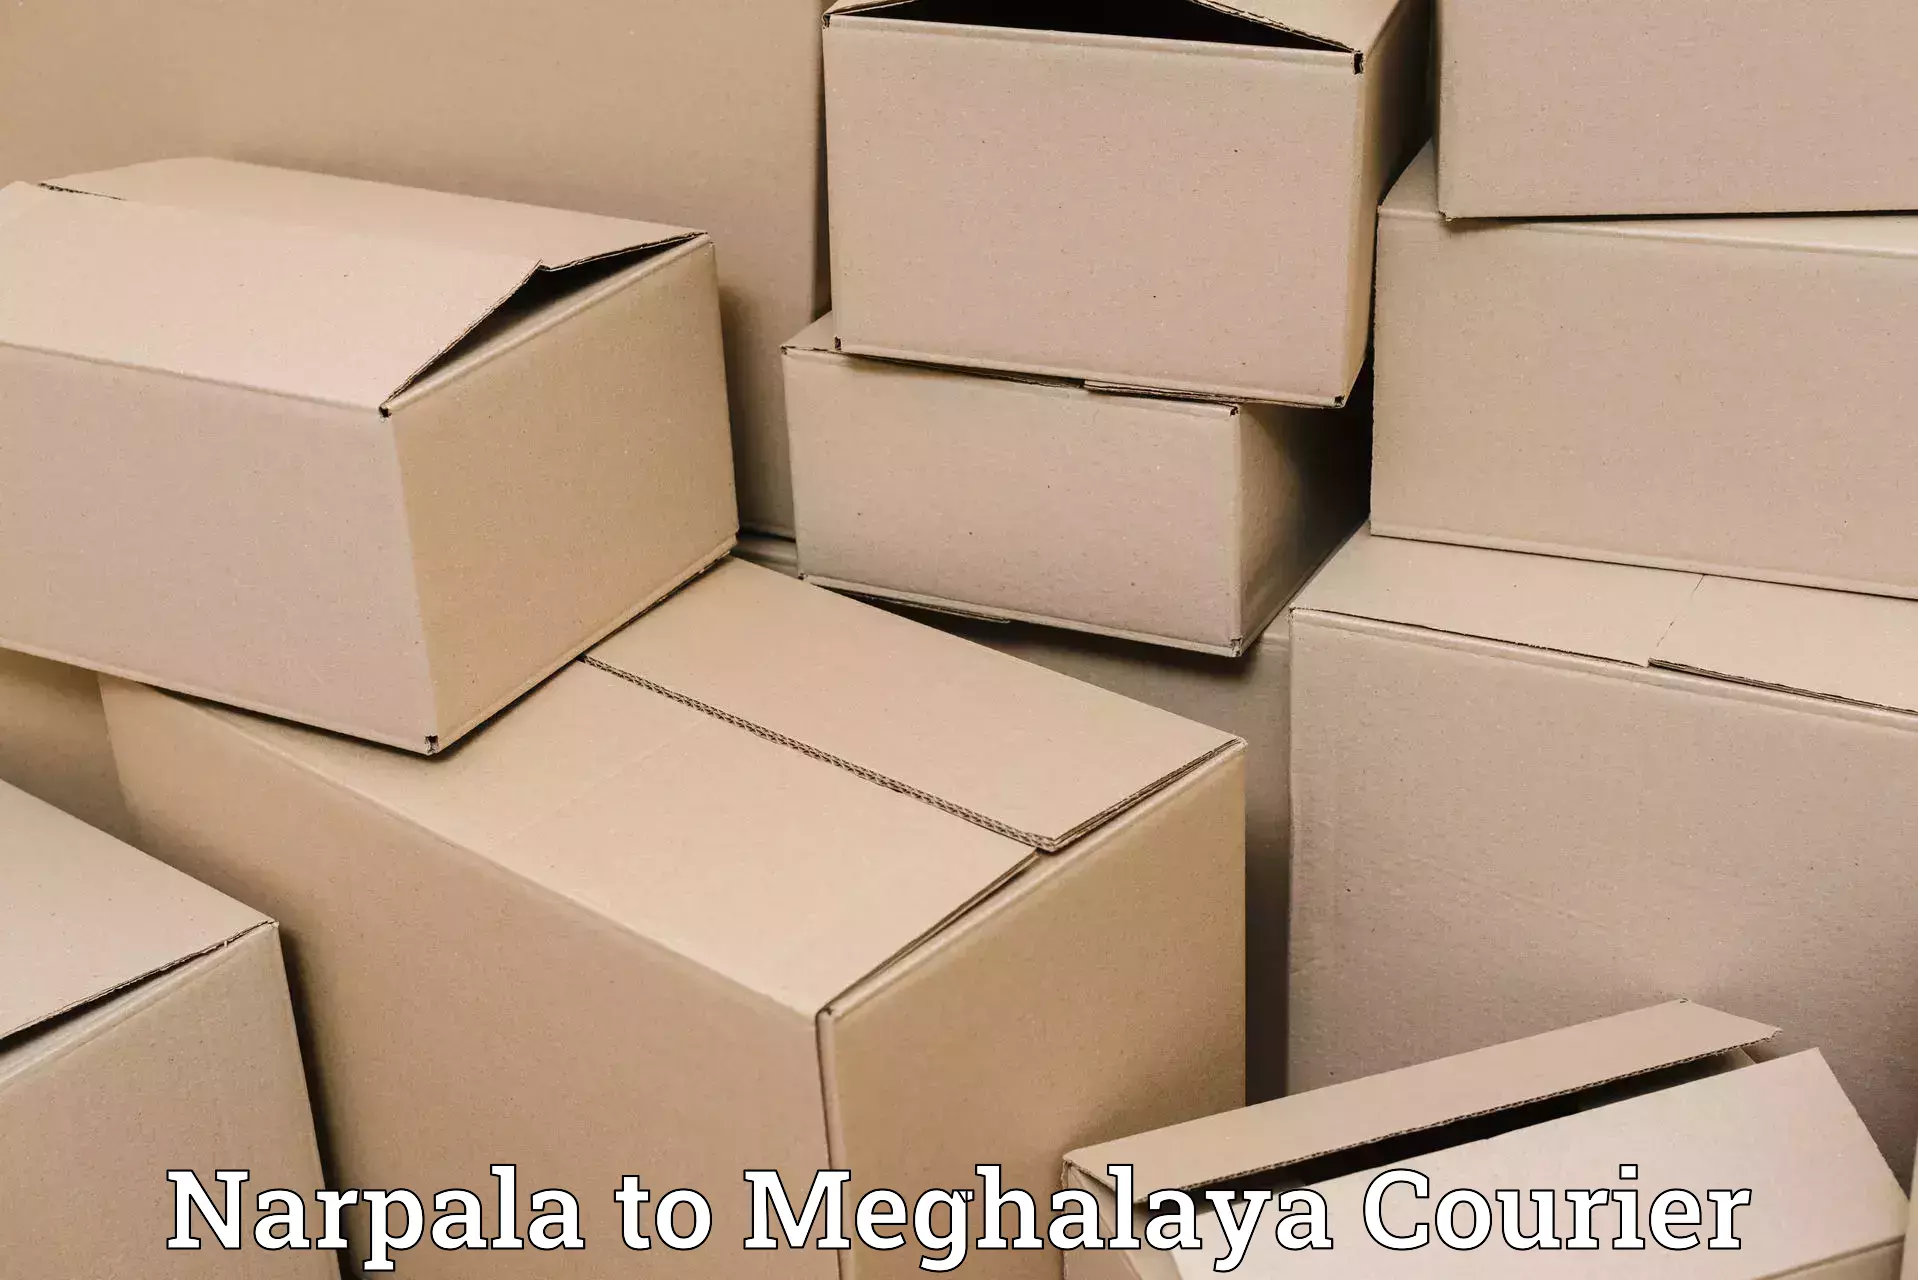 Premium courier solutions Narpala to Meghalaya